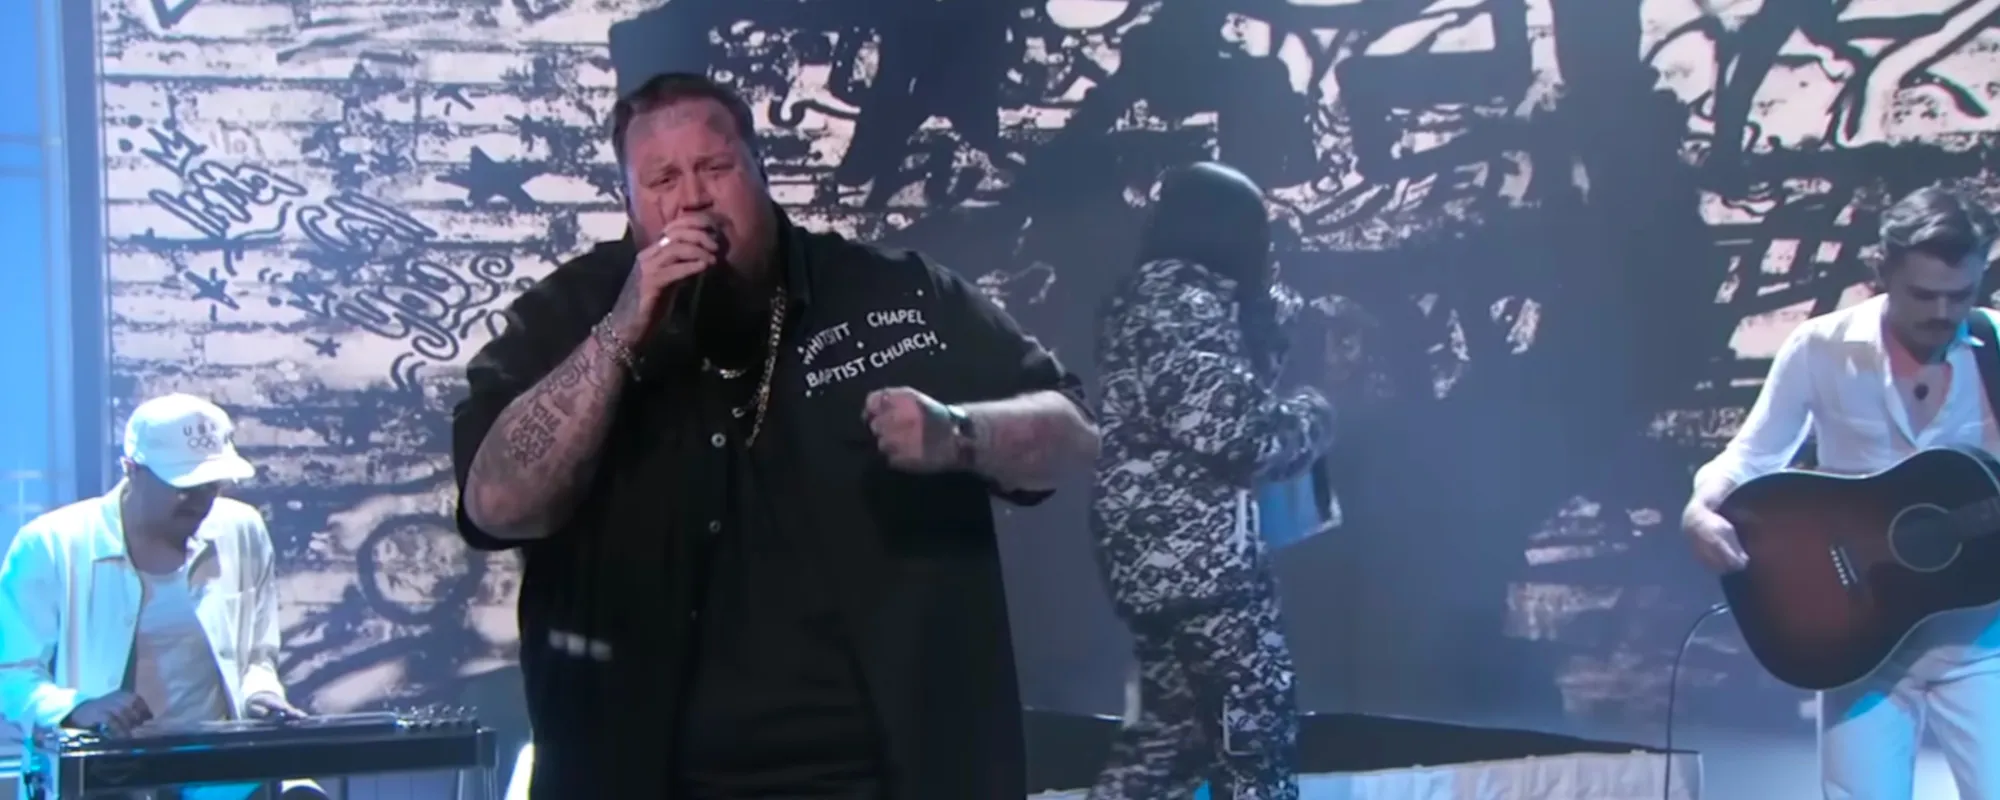 Jelly Roll and Jessie Murph Bring “Wild Ones” to ‘Jimmy Kimmel Live’